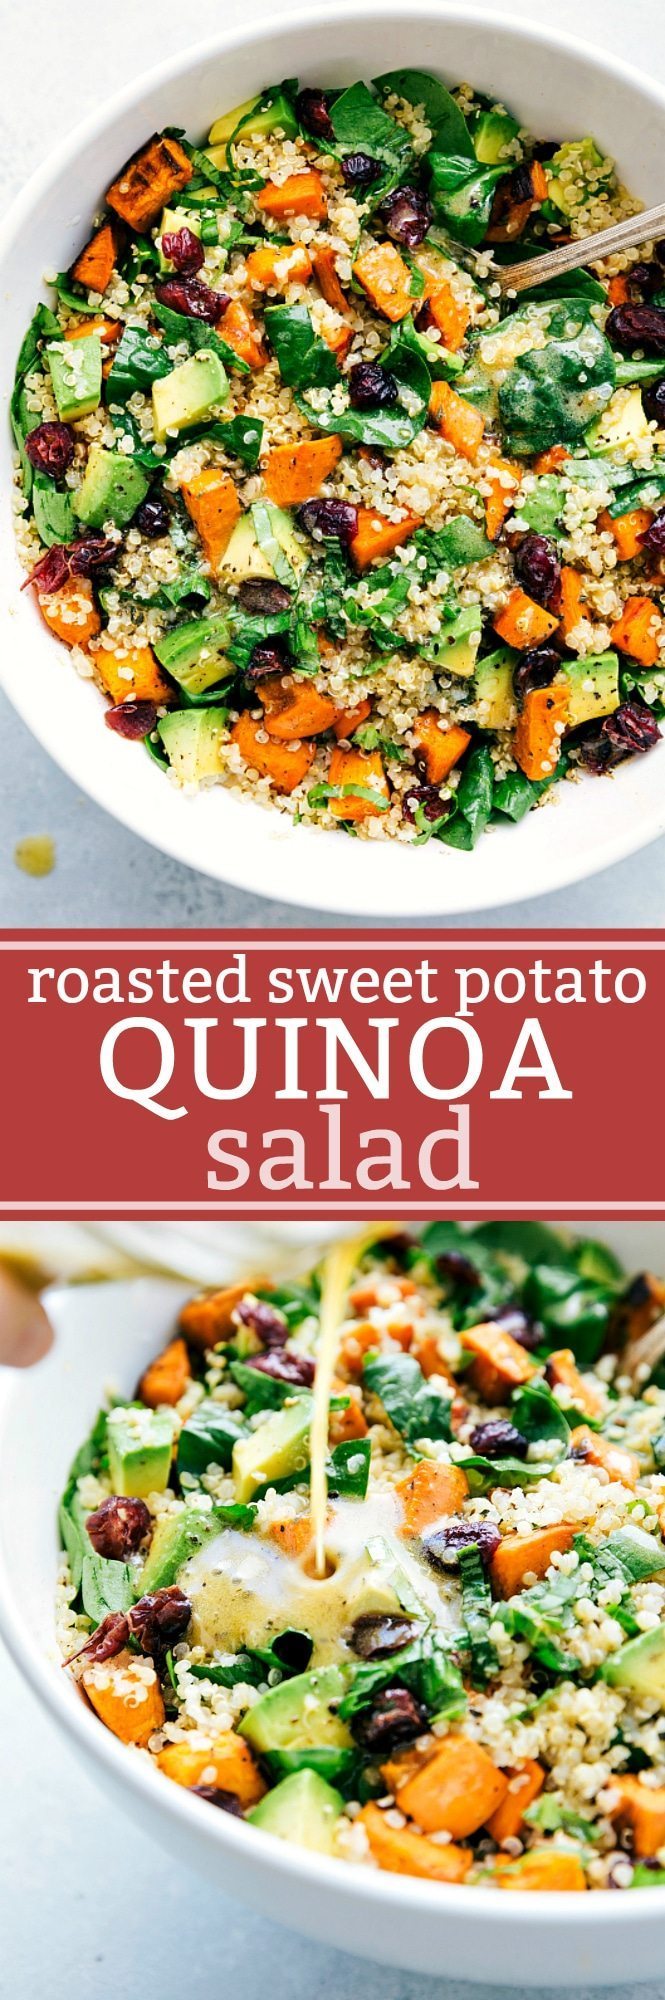 Roasted sweet potato and quinoa salad! Fresh and healthy roasted sweet potato and quinoa salad made with spinach and avocados. A healthy and delicious lemon vinaigrette dressing coats this salad. from chelseasmessyapron.com